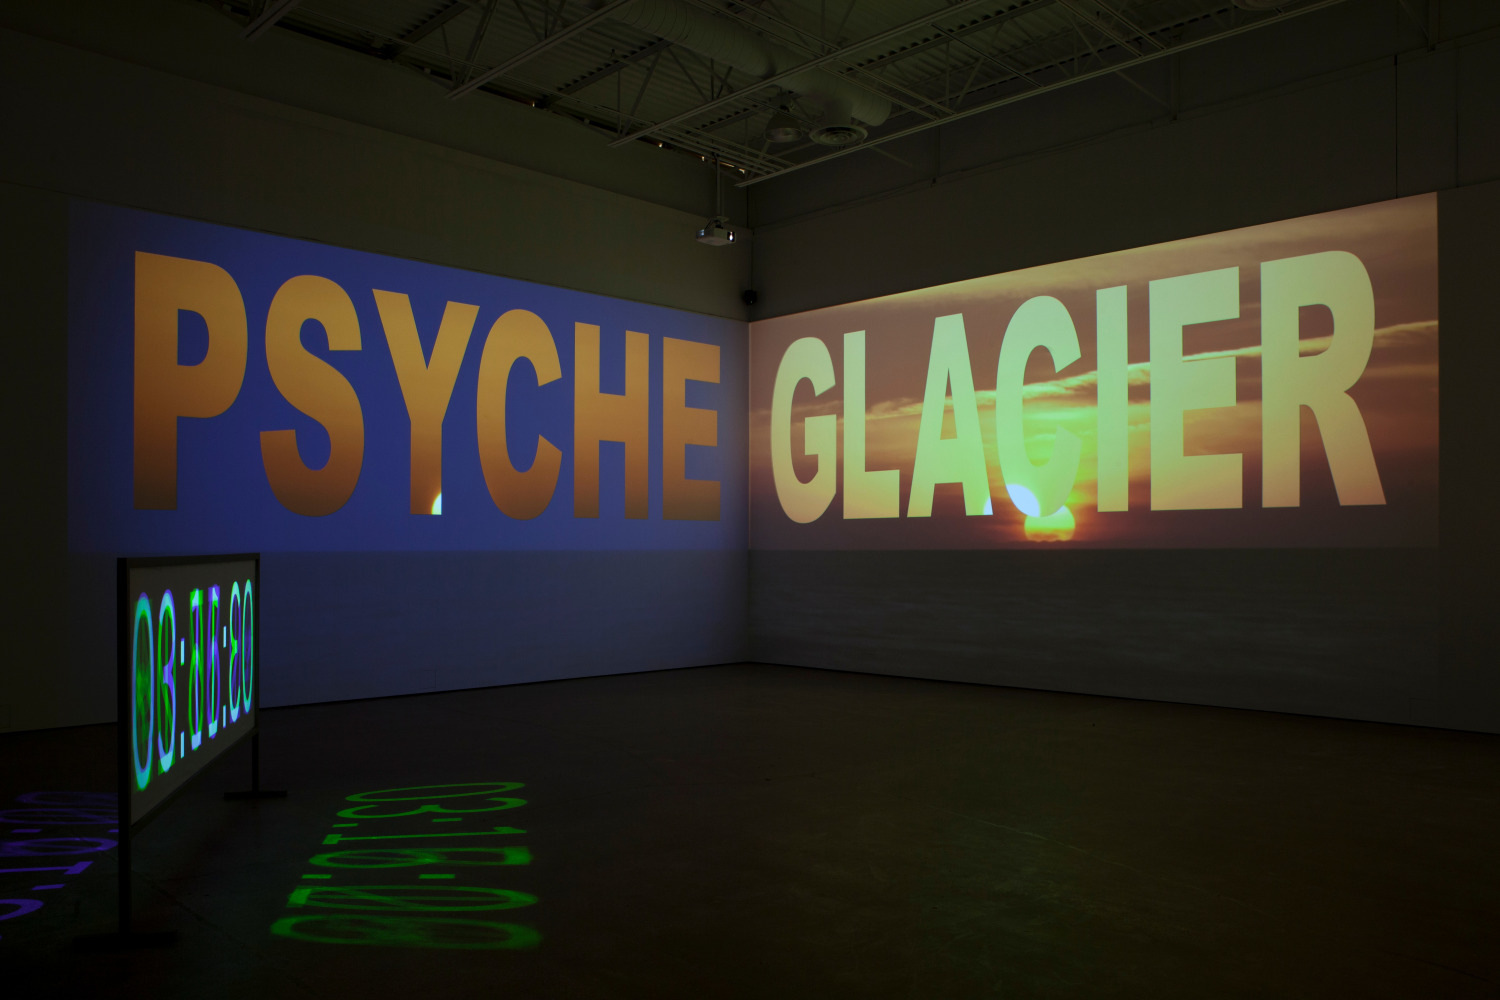 Charles Atlas
The Waning of Justice, 2015
Multi-channel video installation with sound
Duration: 23 minutes, 44 seconds
Edition of 5 plus 2 artist&amp;rsquo;s proof

Installation view, Columbus College of Art and Design Contemporary Art Space,&amp;nbsp;September 10 &amp;ndash; December 11, 2015